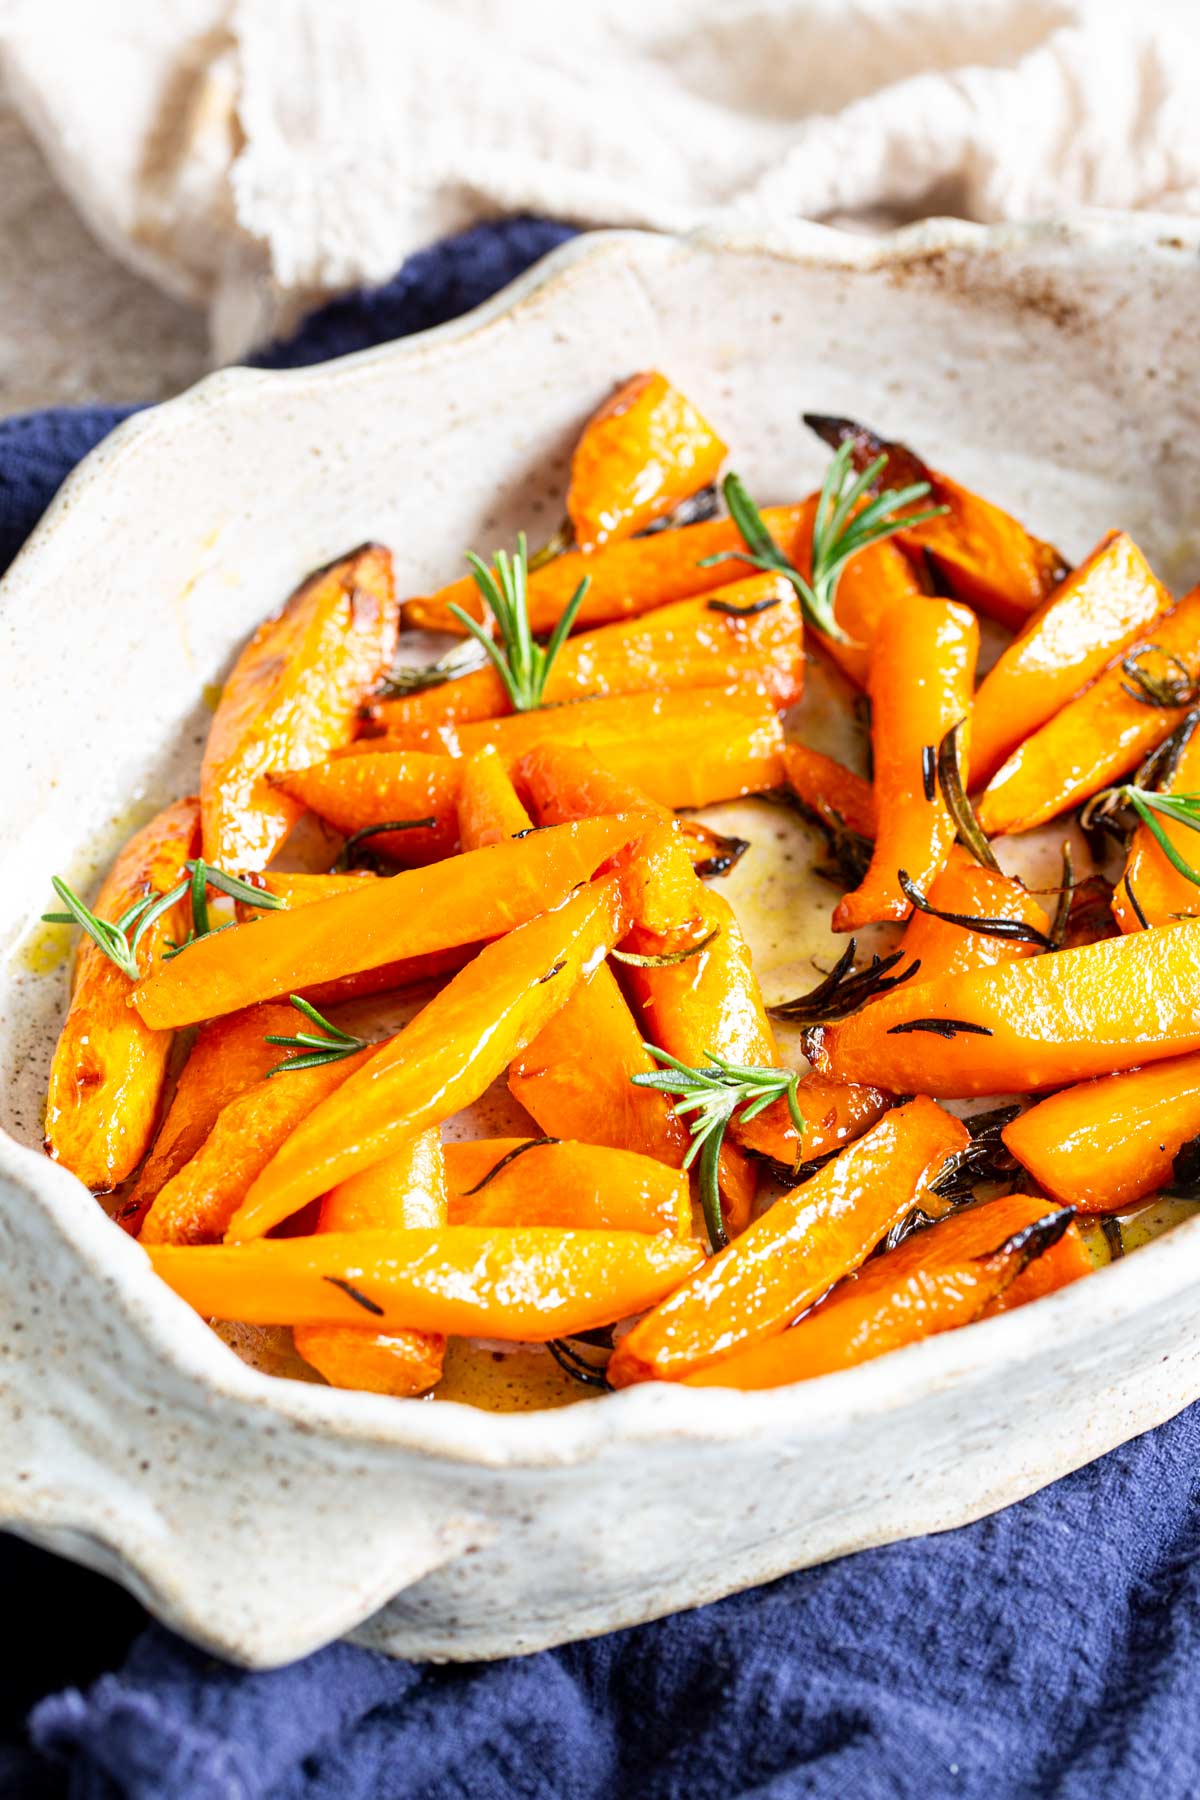 a rustic dish of roasted carrots with spring of rosemary as garnish